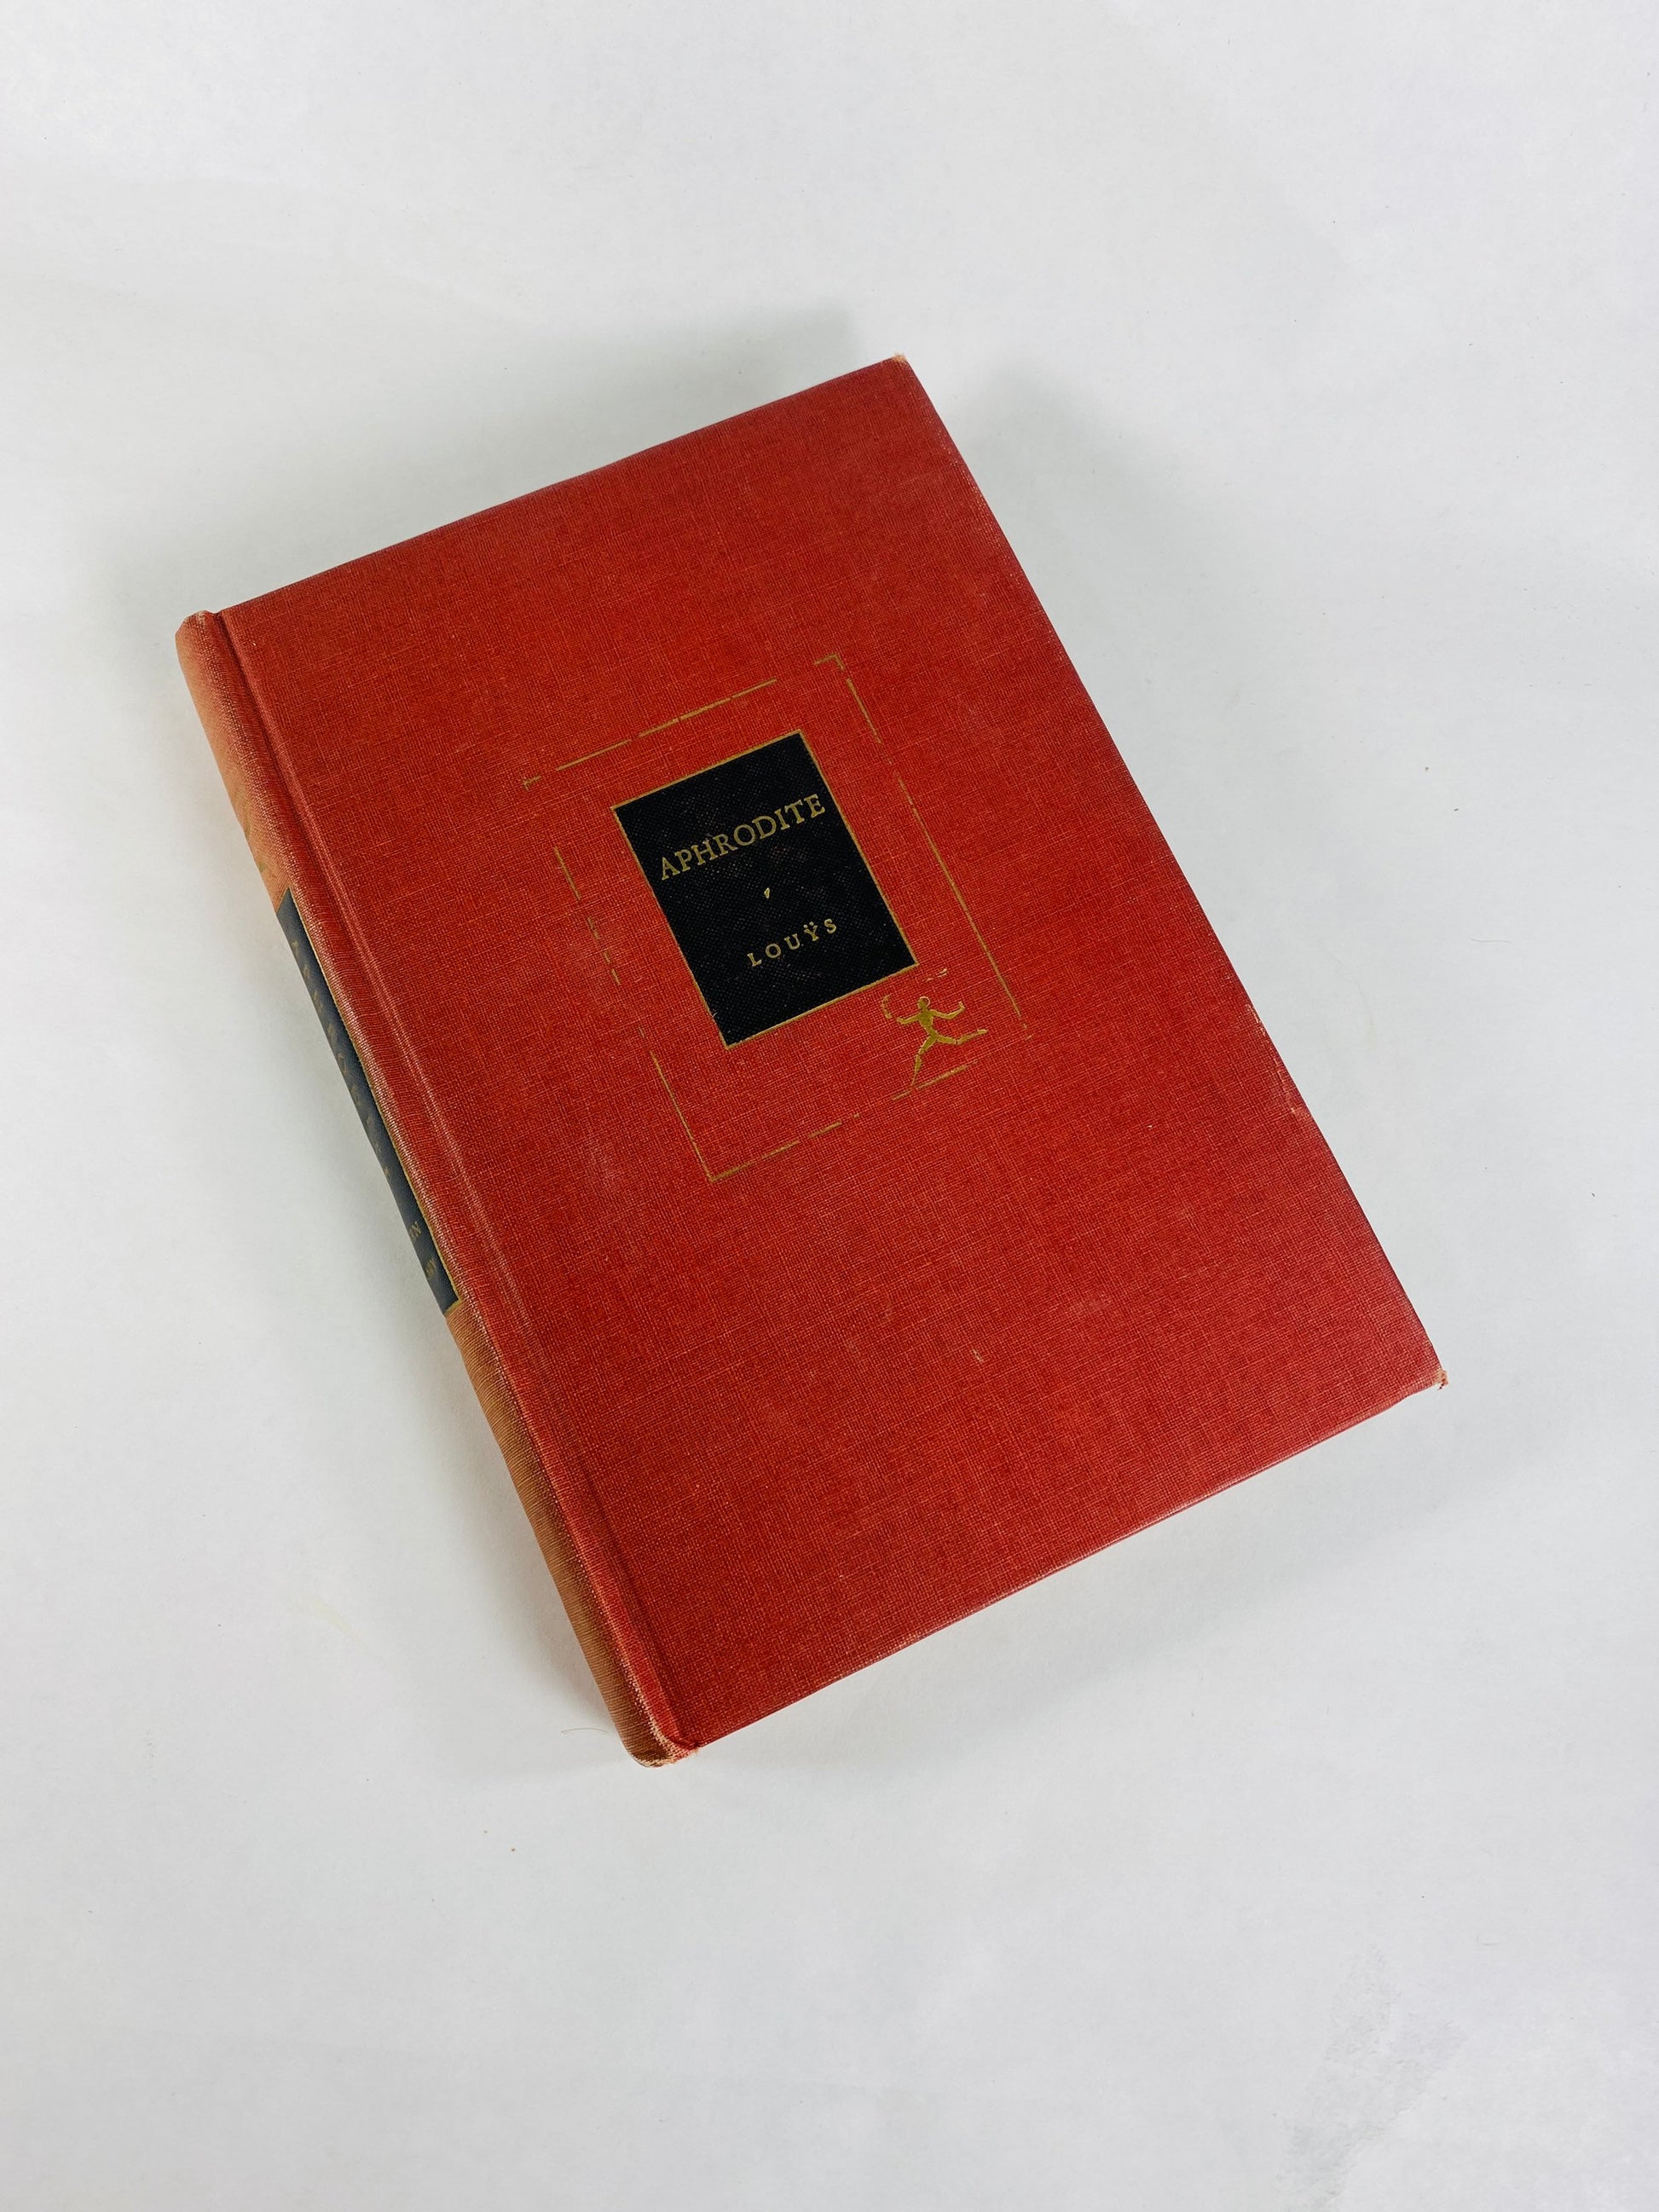 Aphrodite Vintage red Modern Library book circa 1933 by Pierre Louÿs story of Chrysis and the sculptor Démétrios